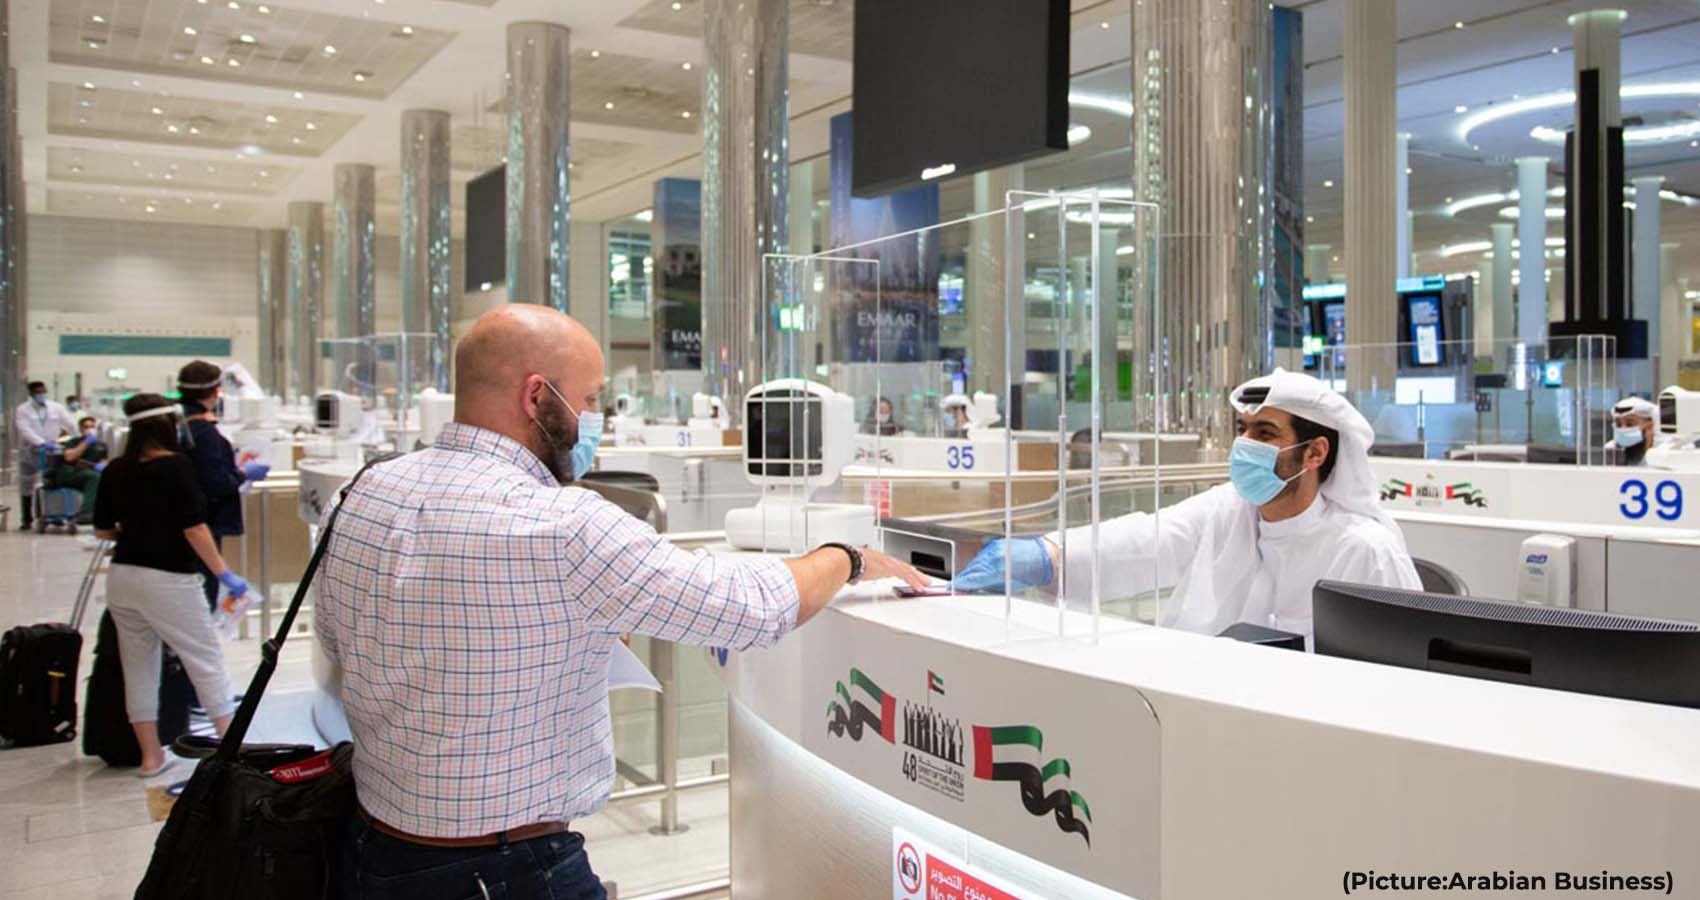 Emirates IDs To Be Used As Proof Of Residency For Expats